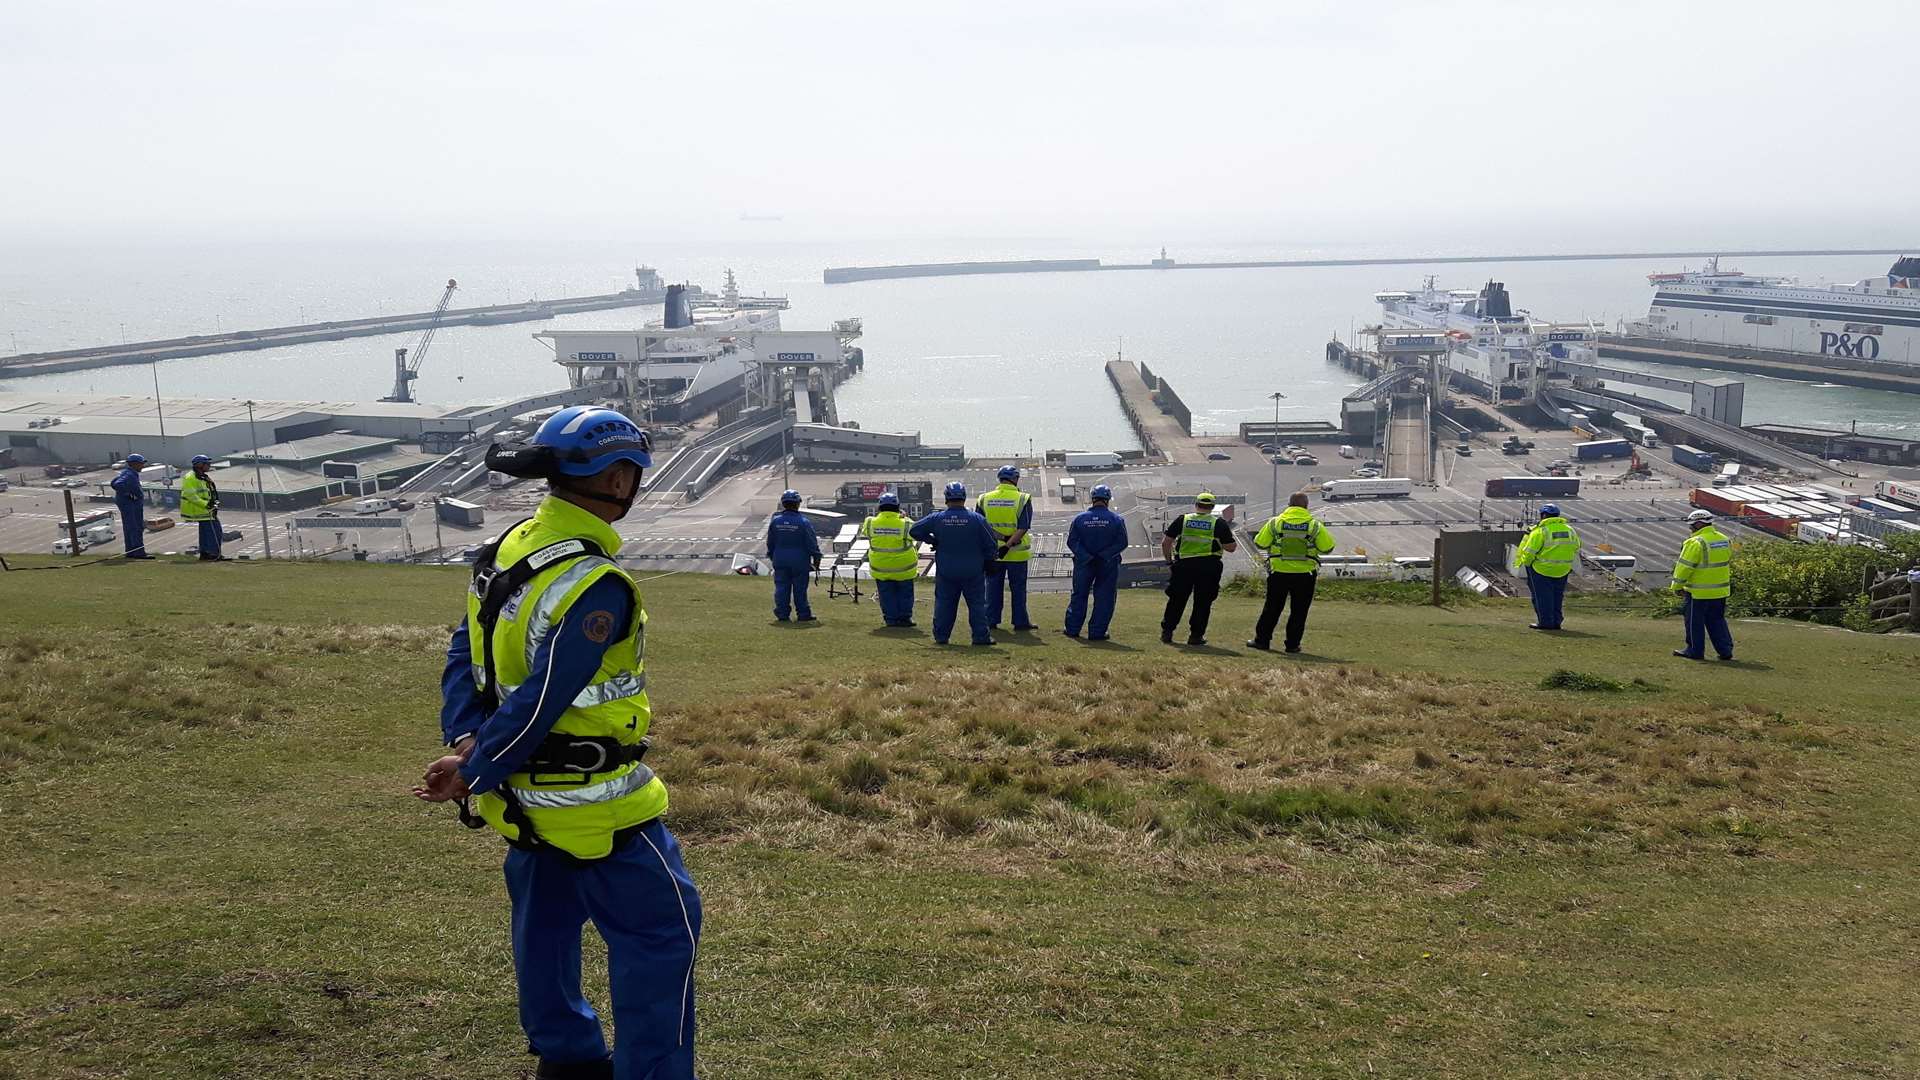 Coastguard teams and police have been scouring the cliffs of Dover. Library image.